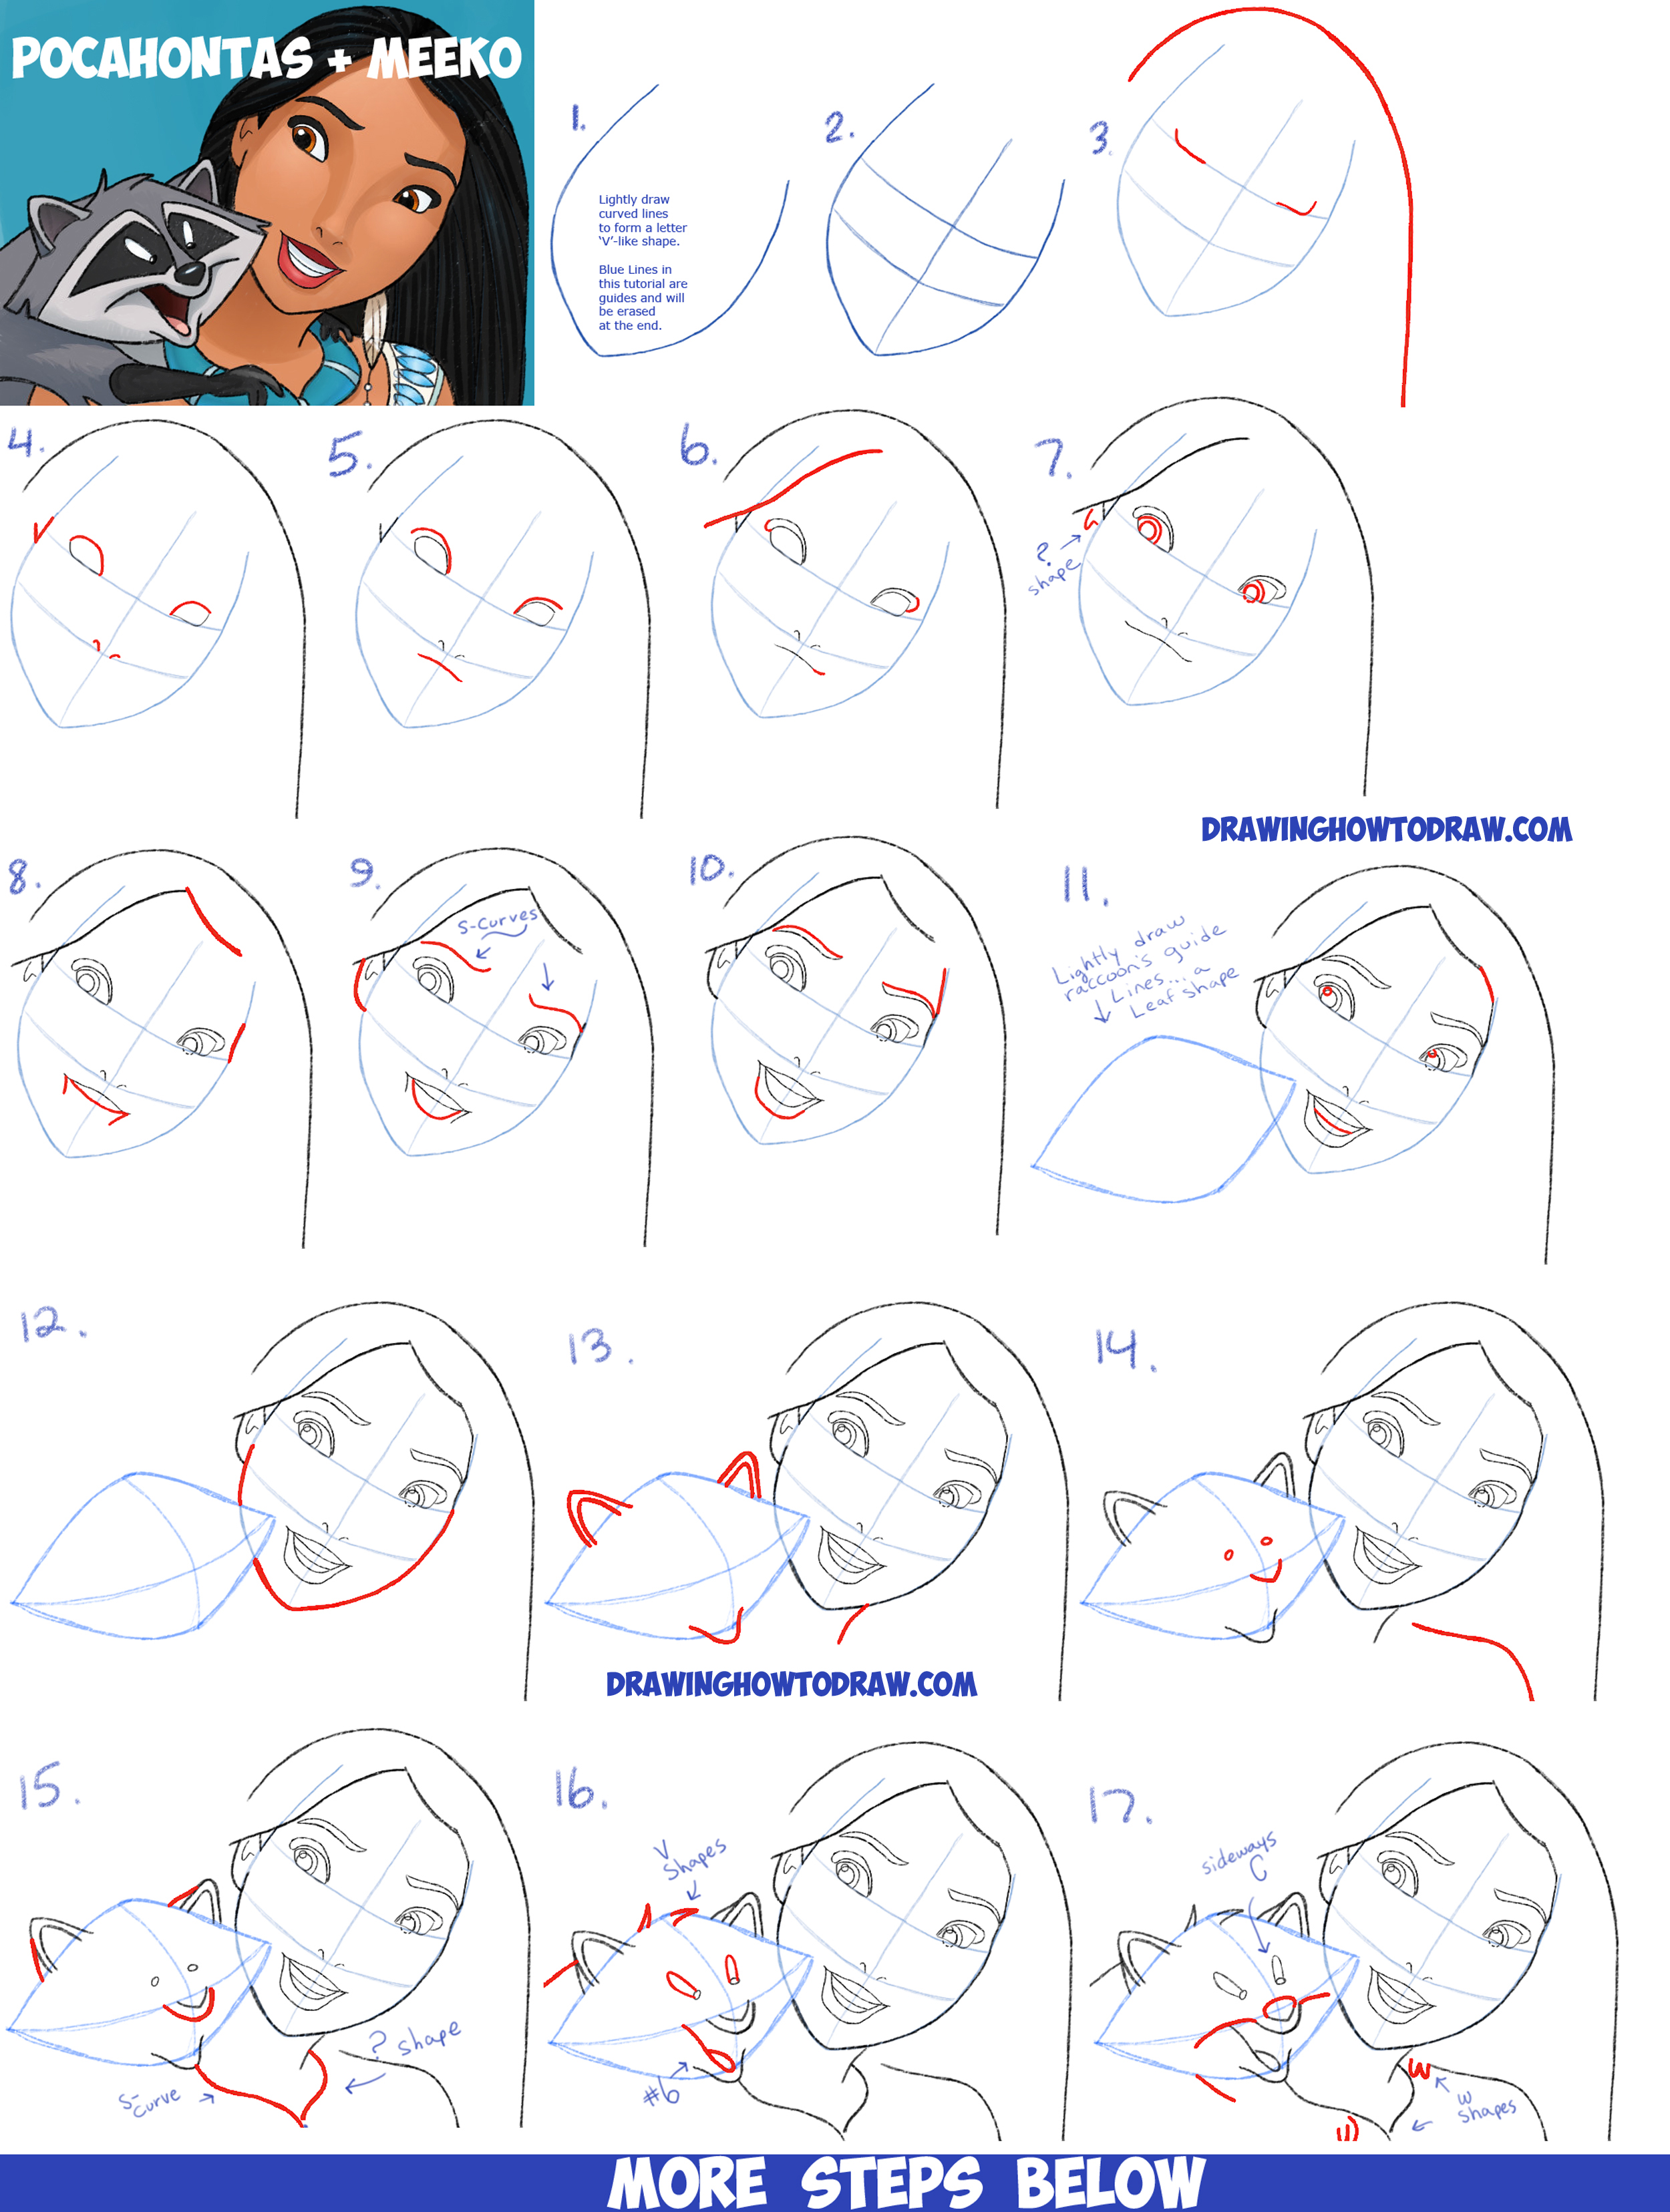 How to Draw Pocahontas and Meeko Raccoon Easy Step by Step Drawing Tutorial for Kids and Beginners